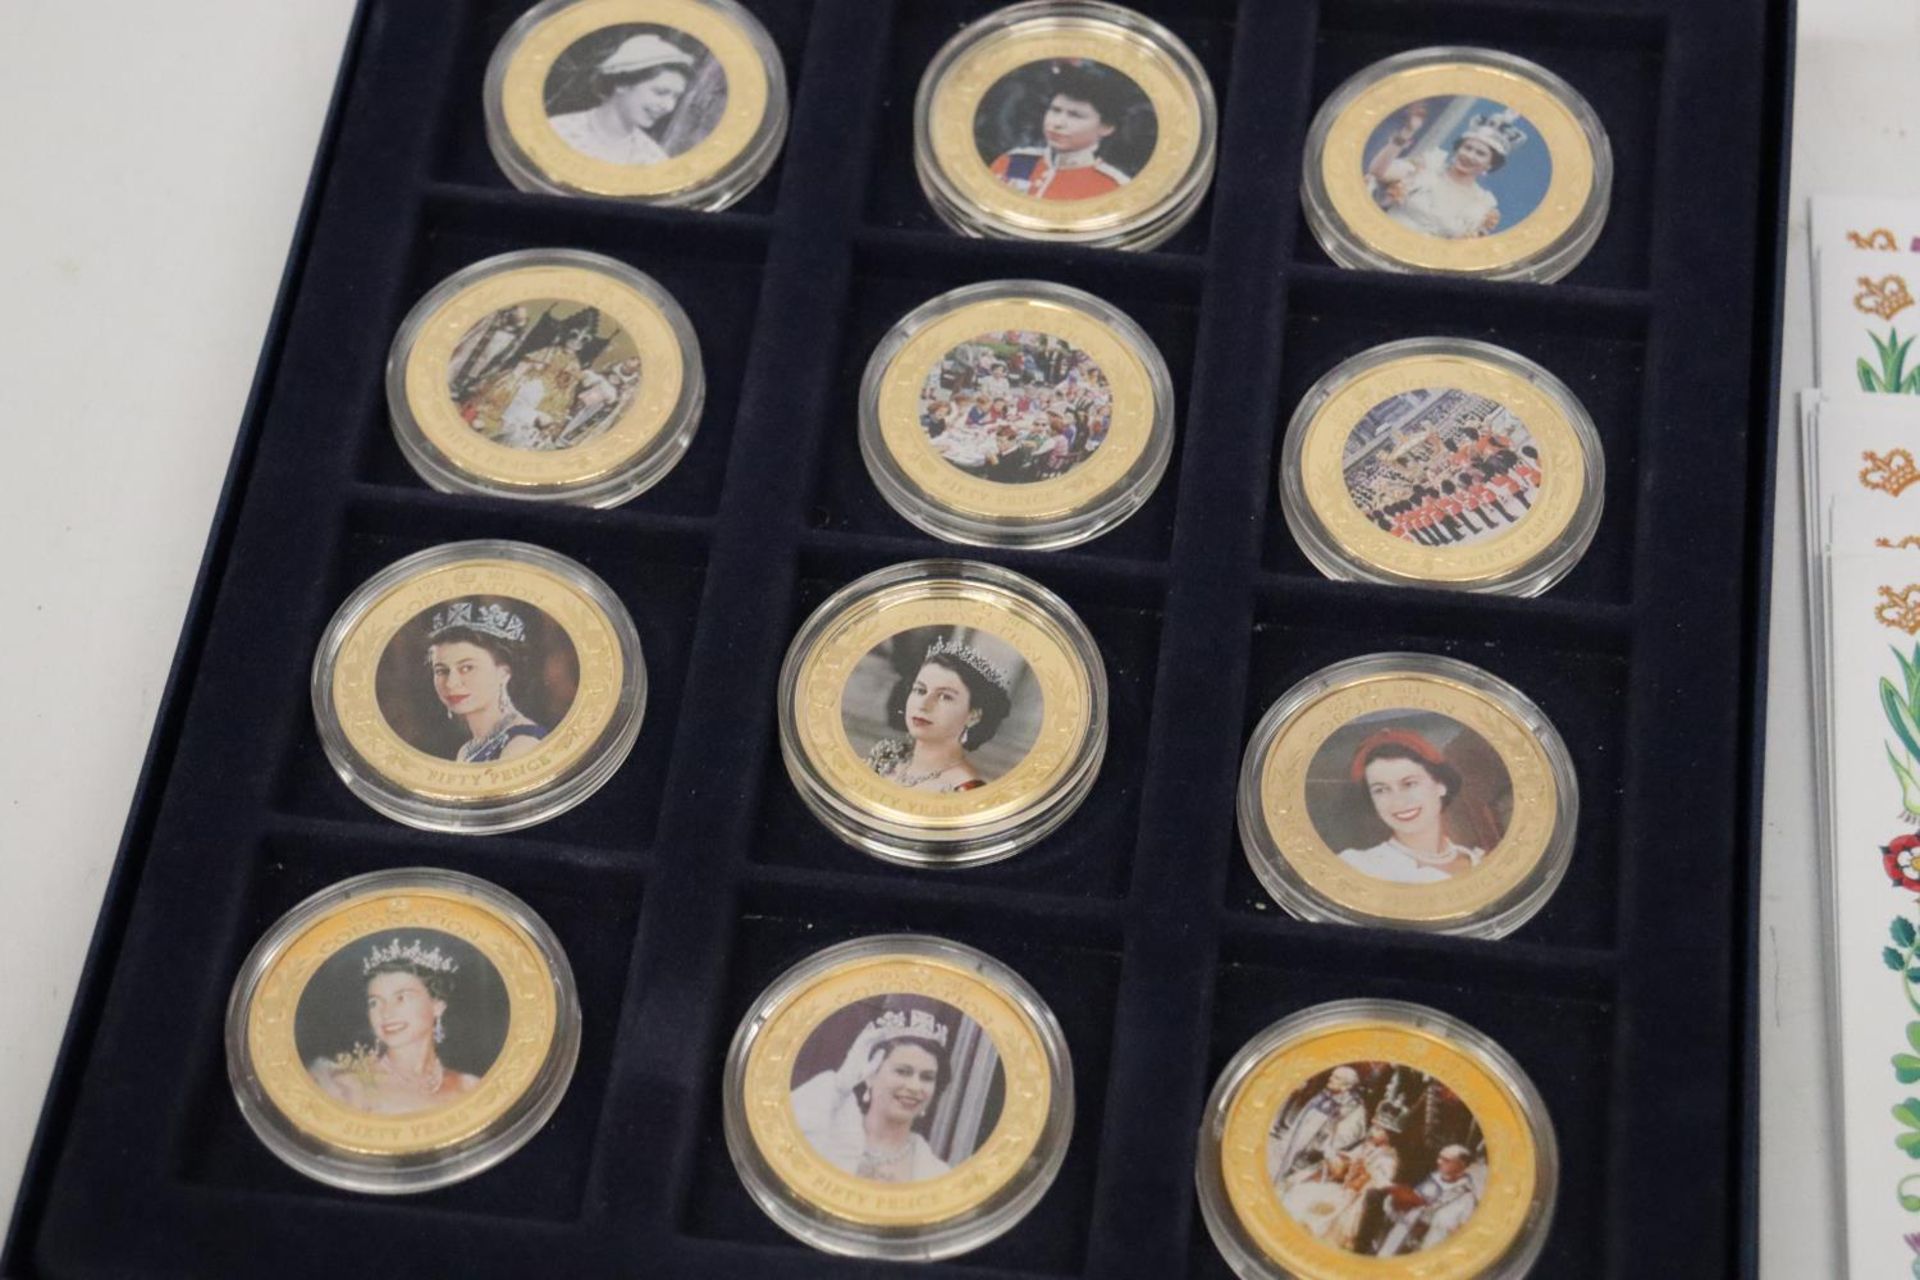 1953-2013 CORONATION JUBILEE OF HM QUEEN ELIZABETH 11, A SELECTION OF 16, 24 CARAT GOLD PLATED COINS - Image 4 of 5